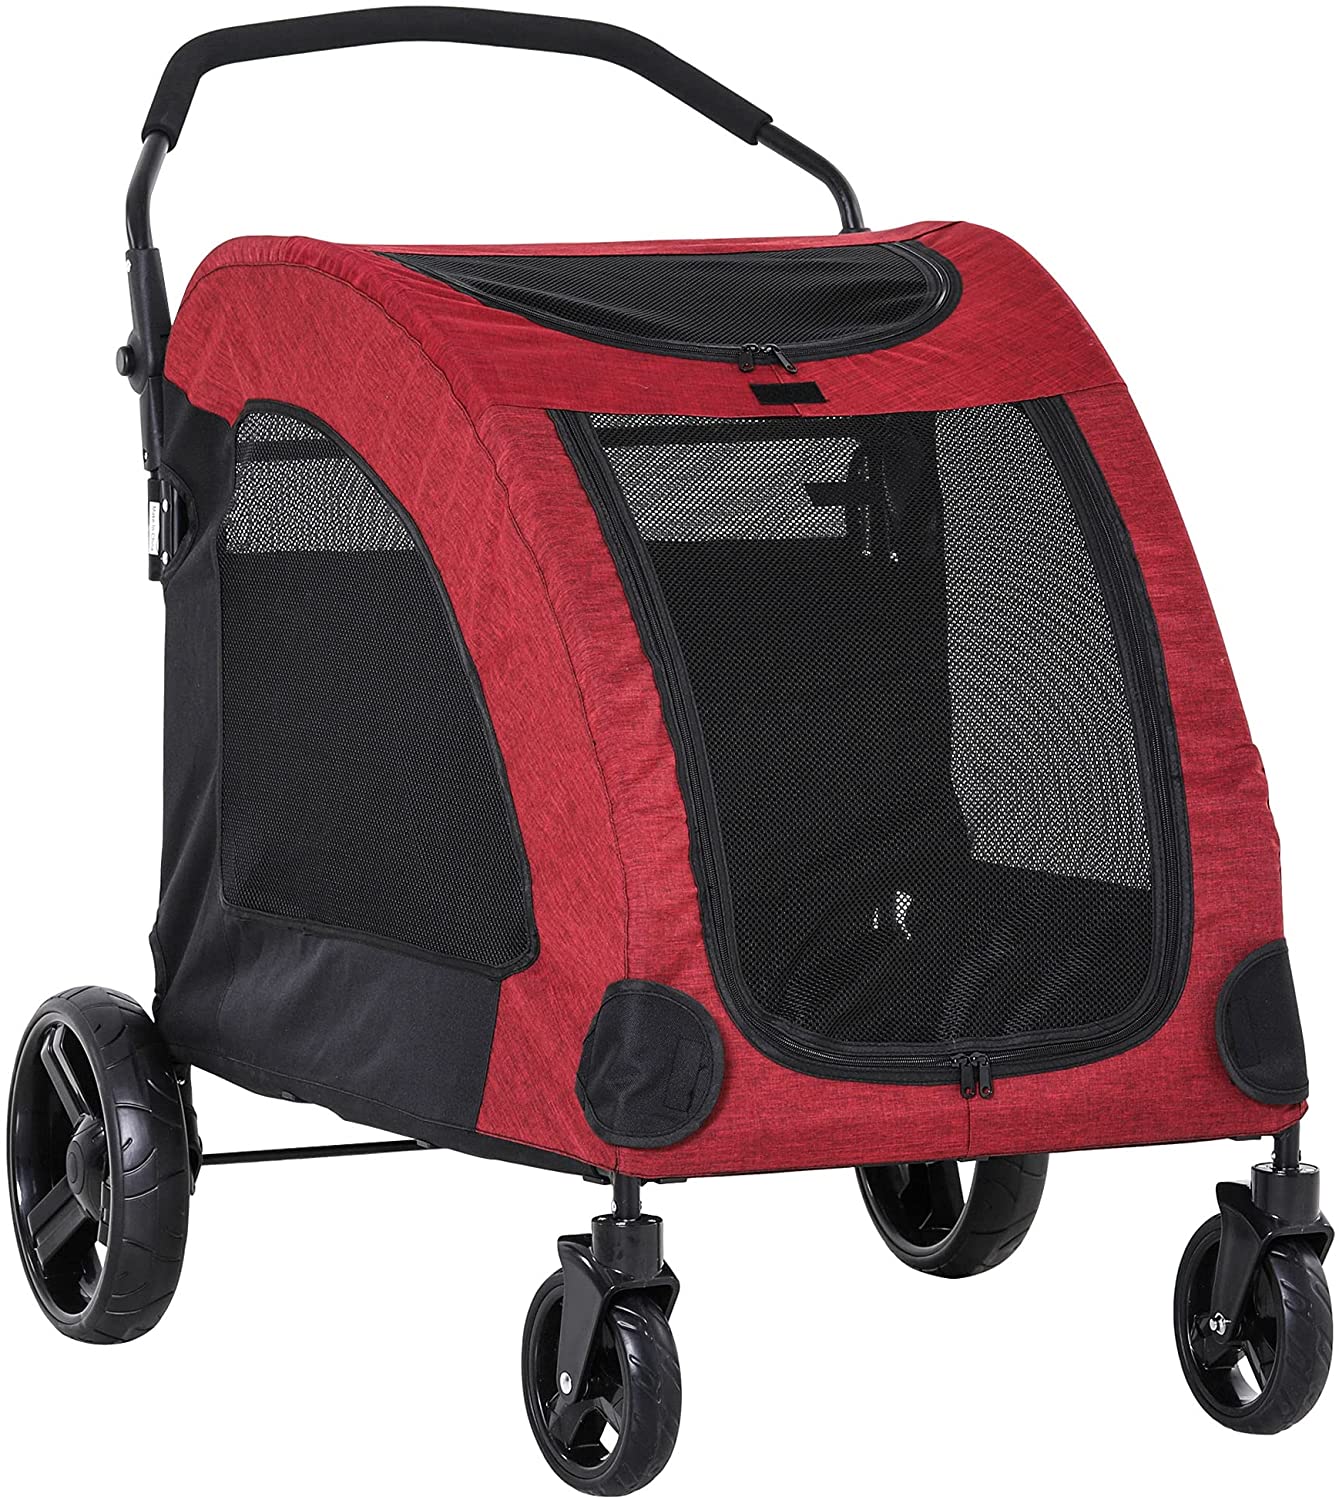 Strollers for medium and large breeds